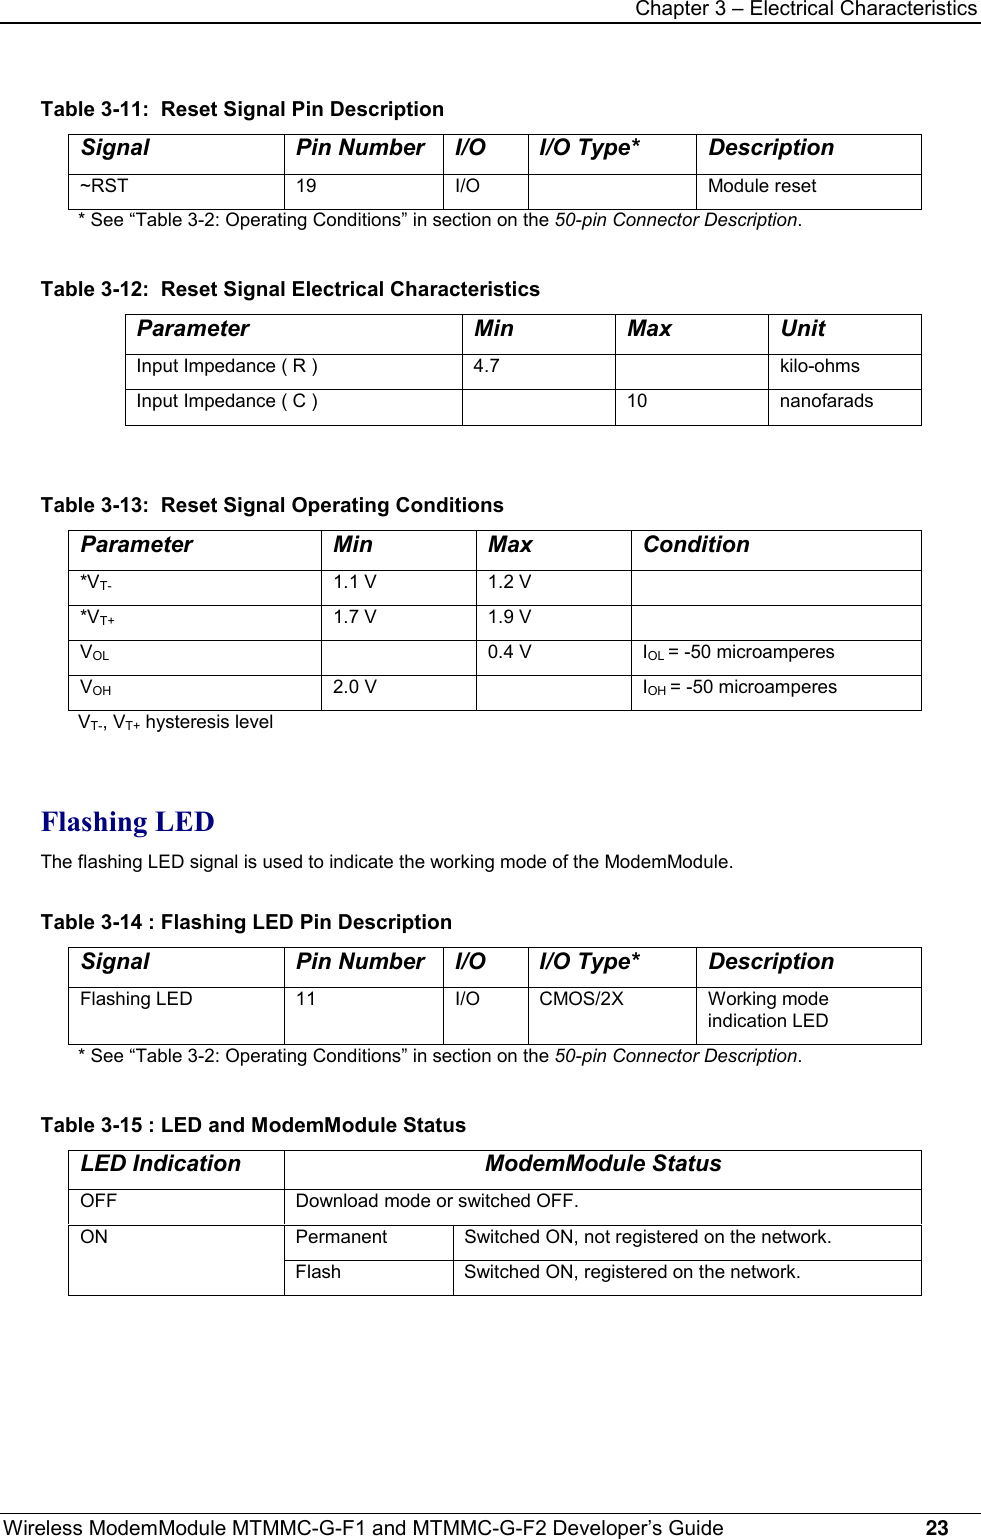 Chapter 3 – Electrical CharacteristicsWireless ModemModule MTMMC-G-F1 and MTMMC-G-F2 Developer’s Guide     23Table 3-11:  Reset Signal Pin DescriptionSignal Pin Number I/O I/O Type* Description~RST 19 I/O Module reset* See “Table 3-2: Operating Conditions” in section on the 50-pin Connector Description.Table 3-12:  Reset Signal Electrical CharacteristicsParameter Min Max UnitInput Impedance ( R ) 4.7 kilo-ohmsInput Impedance ( C ) 10 nanofaradsTable 3-13:  Reset Signal Operating ConditionsParameter Min Max Condition*VT- 1.1 V 1.2 V*VT+ 1.7 V 1.9 VVOL 0.4 V IOL = -50 microamperesVOH 2.0 V IOH = -50 microamperesVT-, VT+ hysteresis levelFlashing LEDThe flashing LED signal is used to indicate the working mode of the ModemModule.Table 3-14 : Flashing LED Pin DescriptionSignal Pin Number I/O I/O Type* DescriptionFlashing LED 11 I/O CMOS/2X Working modeindication LED* See “Table 3-2: Operating Conditions” in section on the 50-pin Connector Description.Table 3-15 : LED and ModemModule StatusLED Indication ModemModule StatusOFF Download mode or switched OFF.Permanent Switched ON, not registered on the network.ONFlash Switched ON, registered on the network.